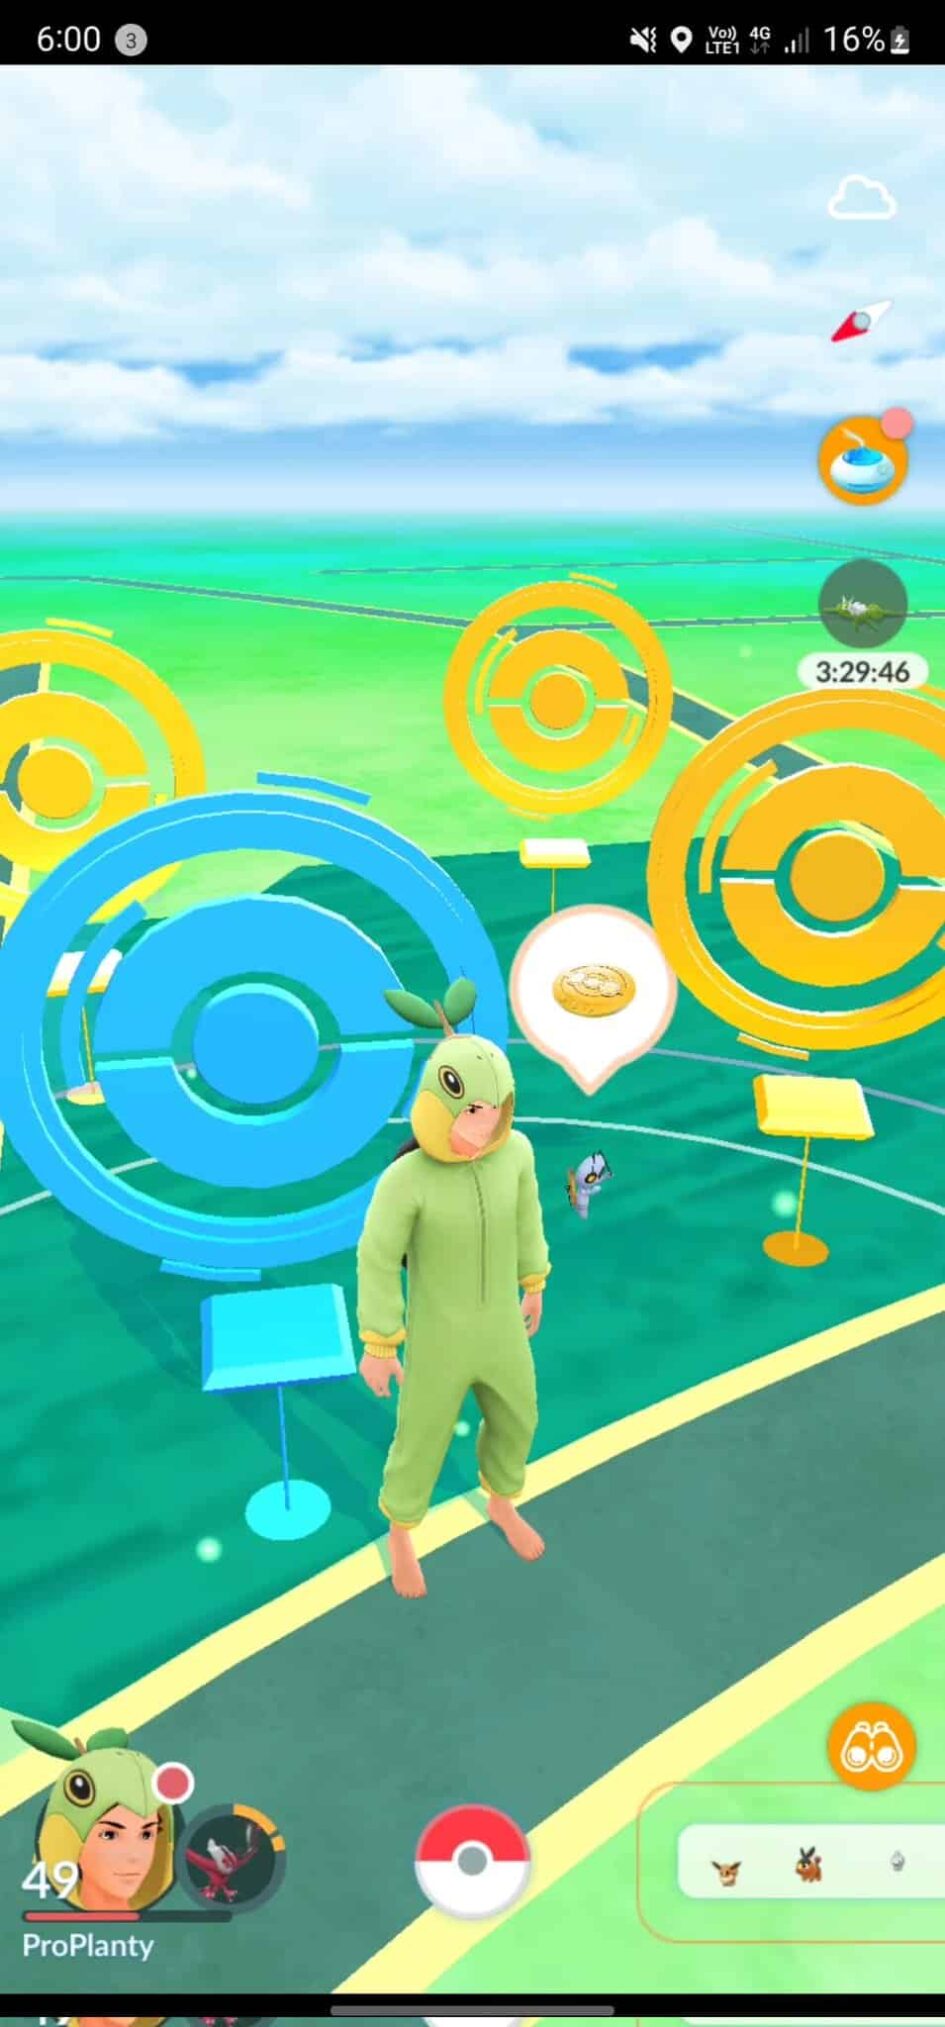 Golden PokéStops, Mysterious Coins, New Pokemon, What's happening in